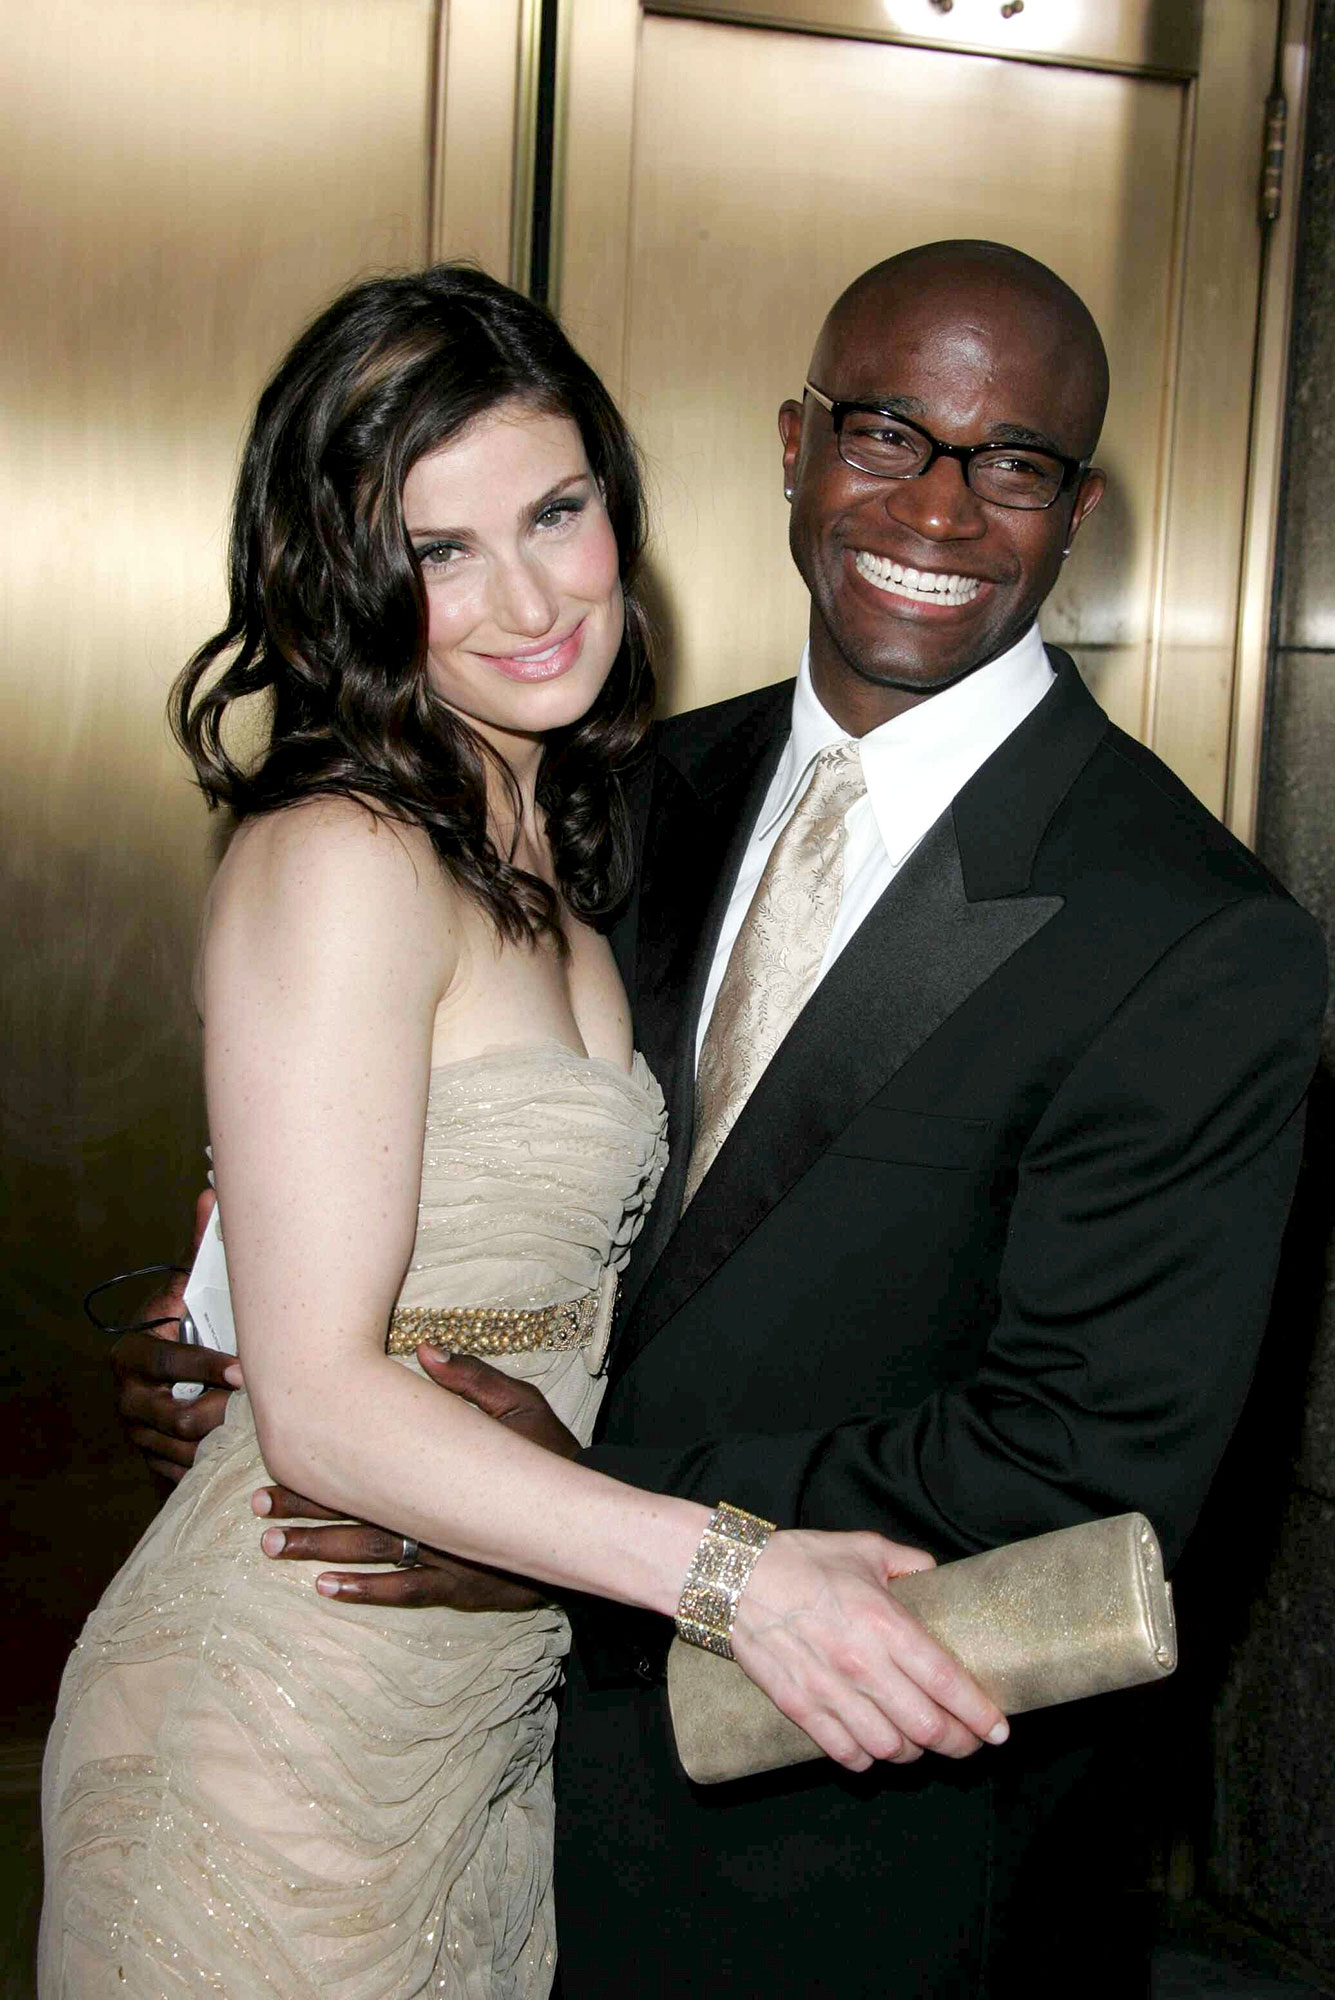 Who Is Idina Menzel's Husband? All You Need To Know!